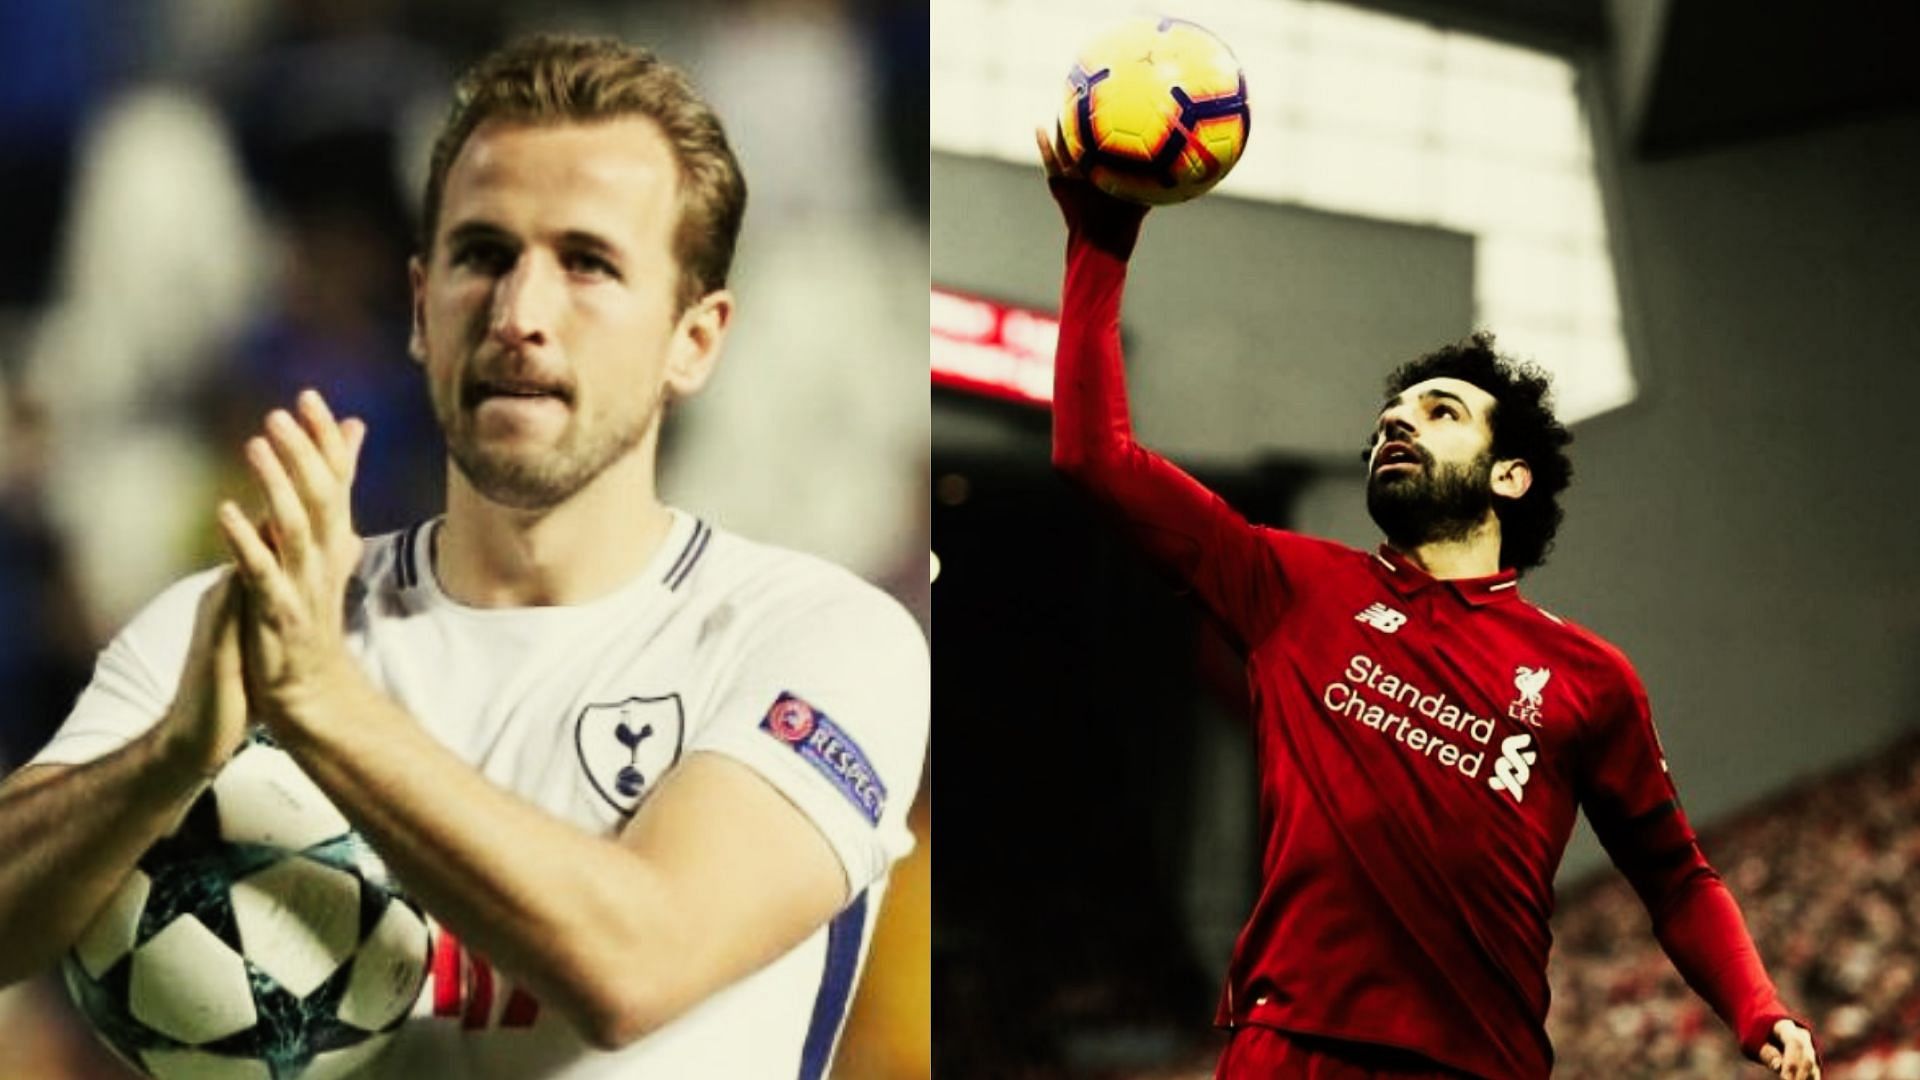 Both Harry Kane and Salah will be Key Players for their respective teams.